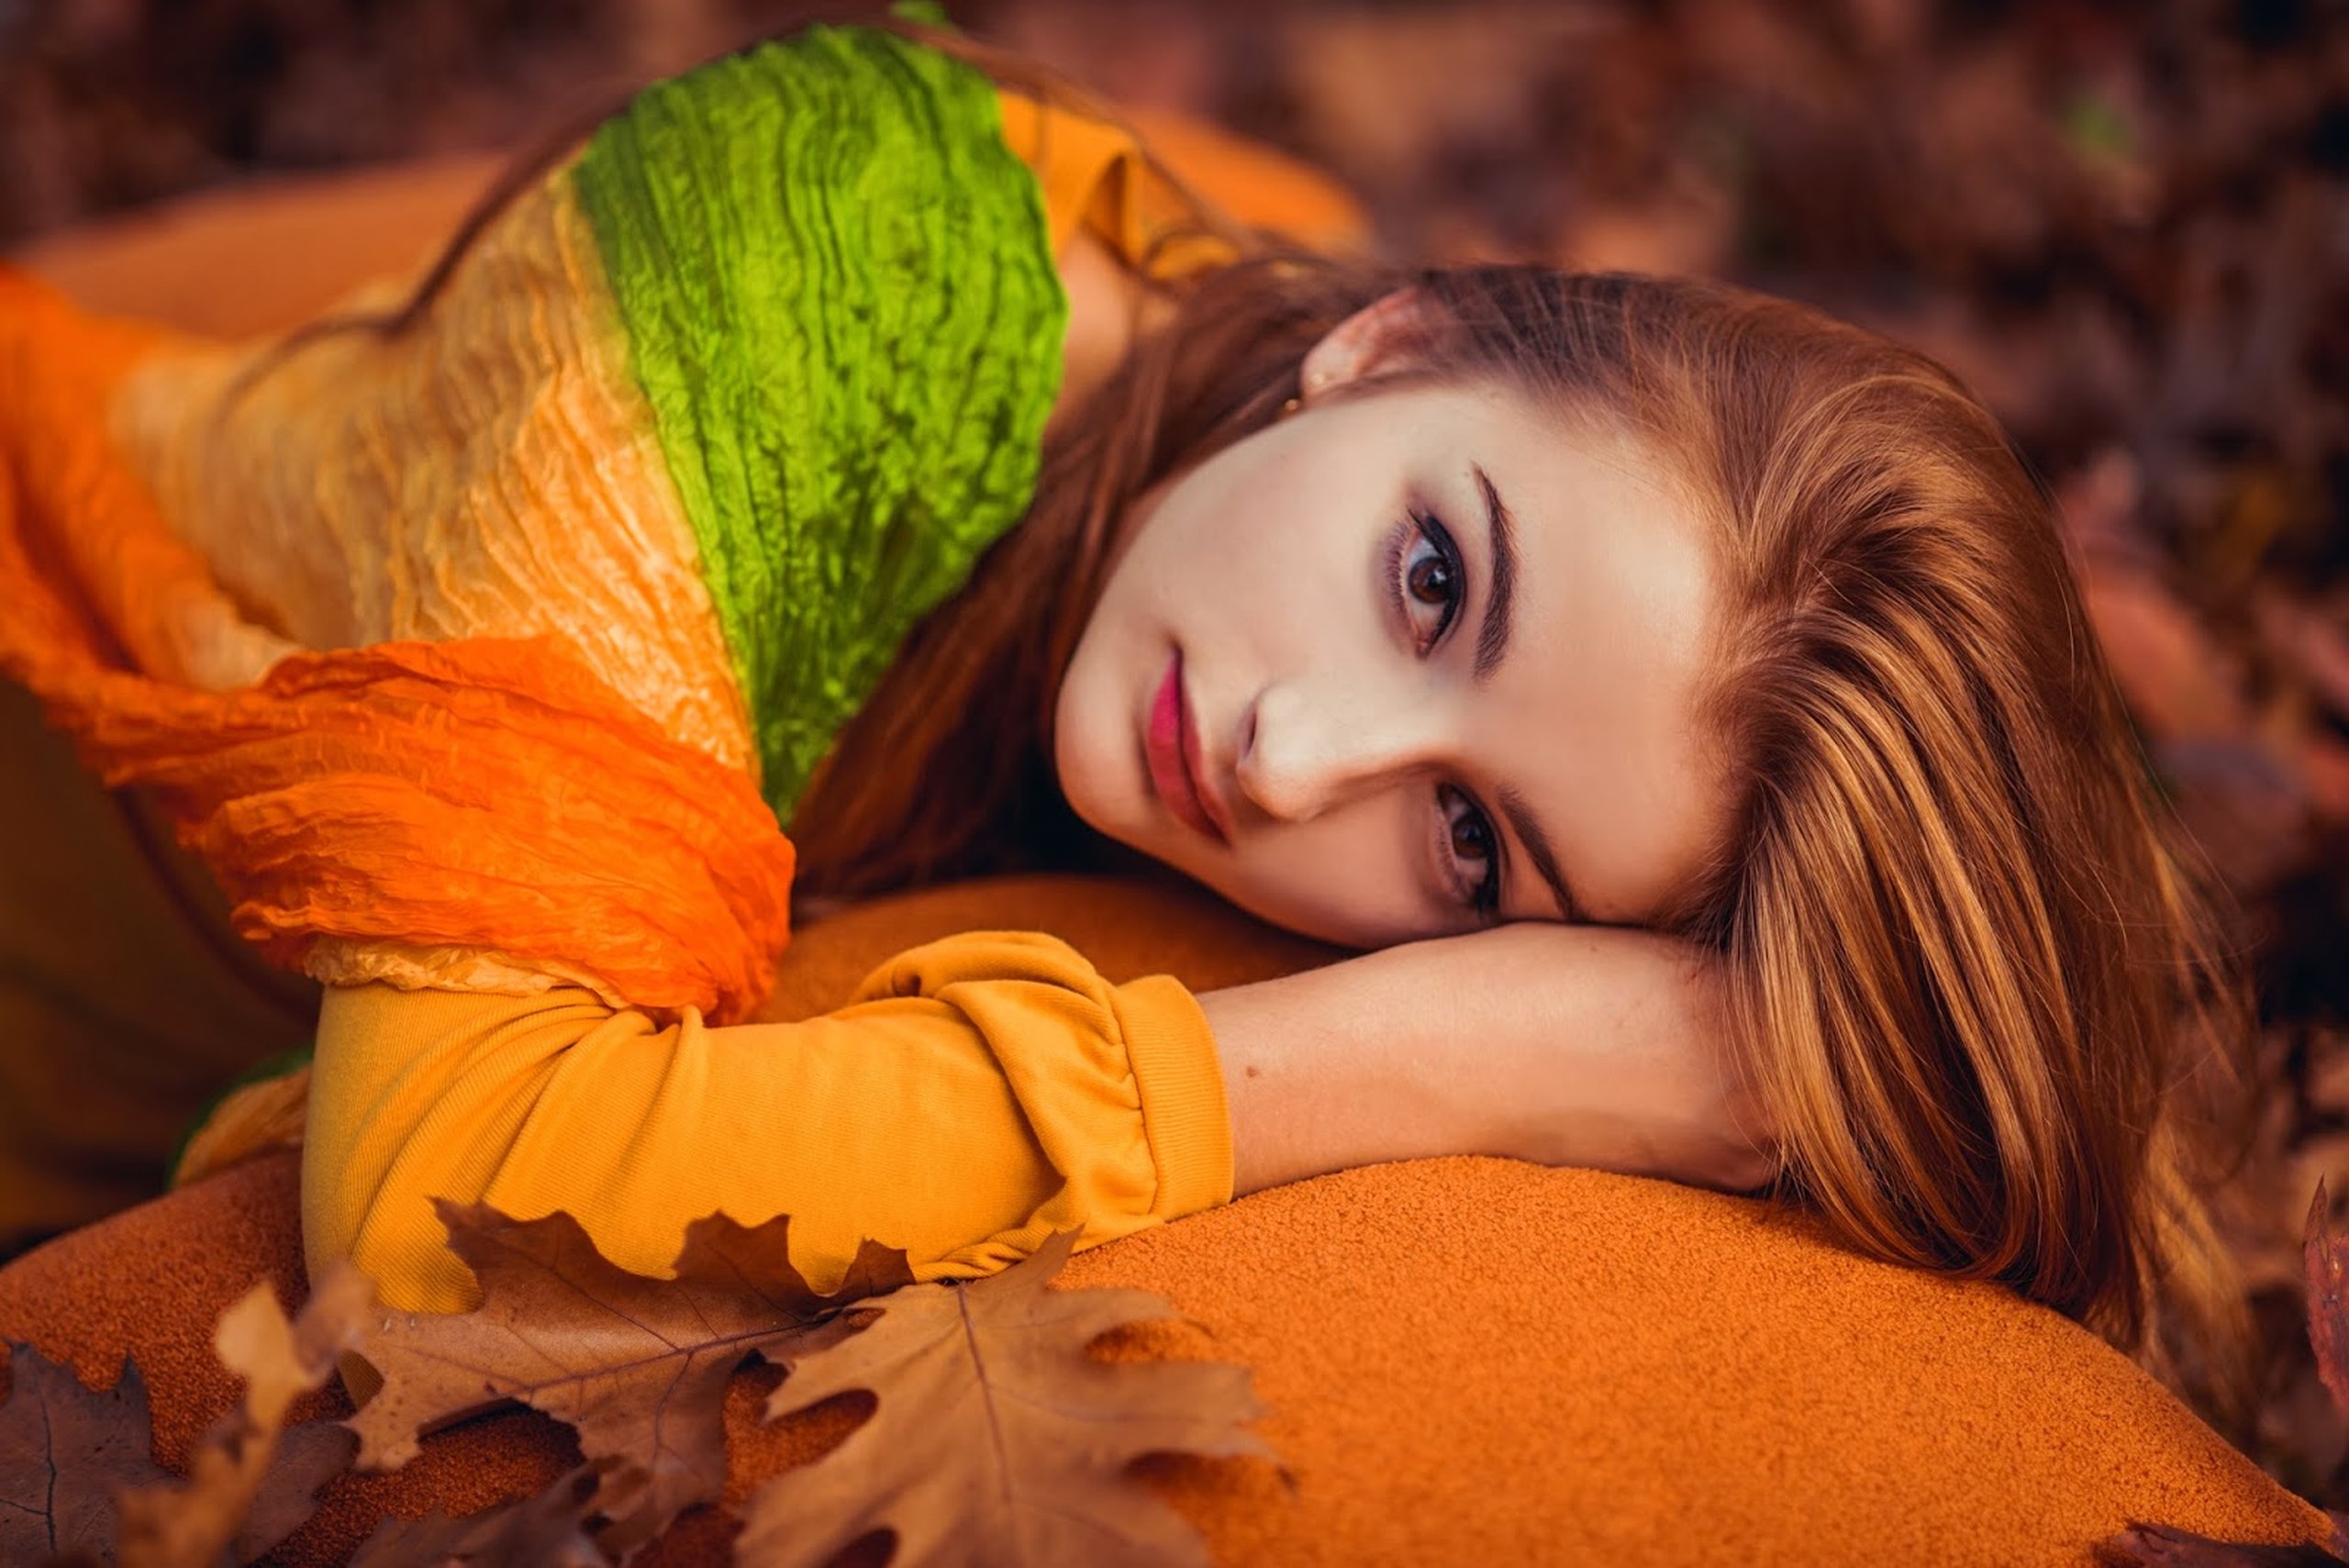 Leaves Redhead Autumn Fall Woman Female Wallpapers Hd Desktop And Mobile Backgrounds